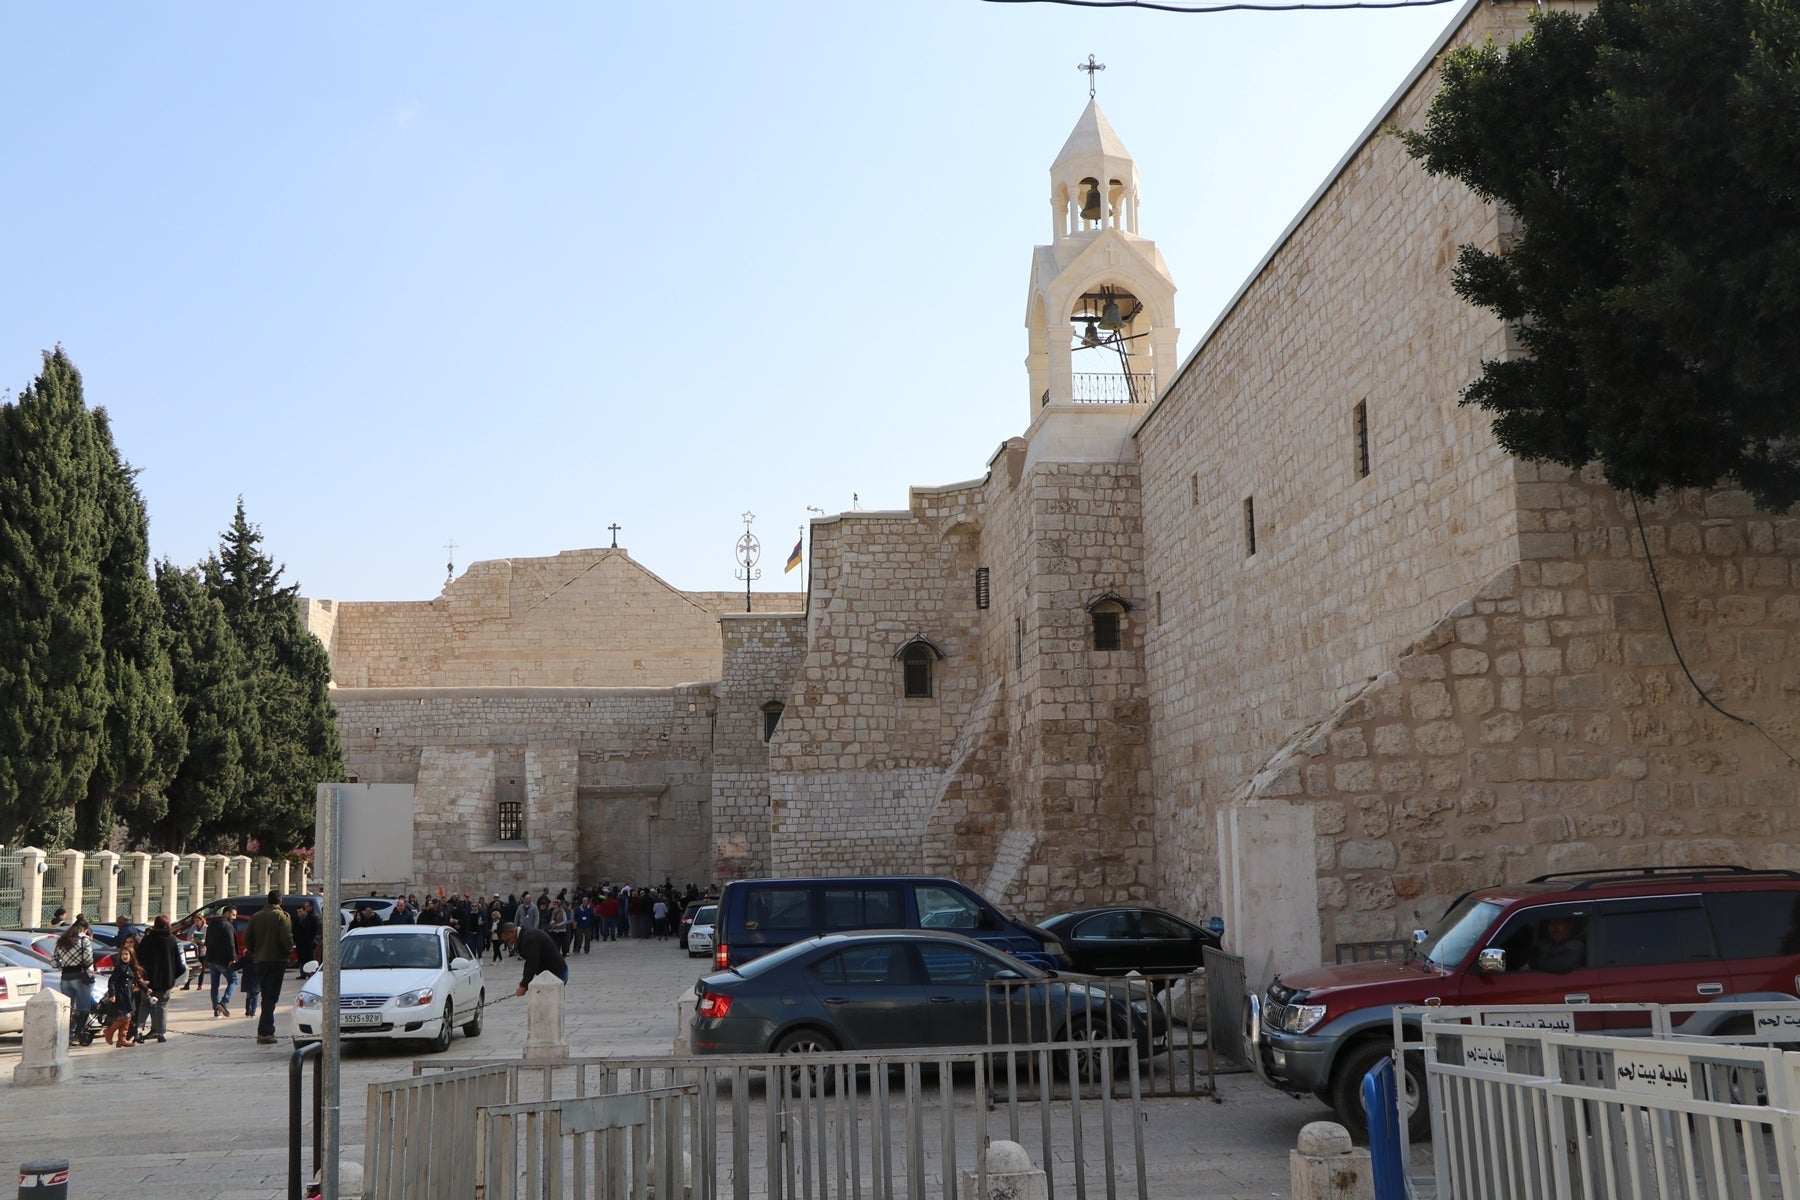 The church of the nativity in Bethlehem city guided tour from Tel Aviv 